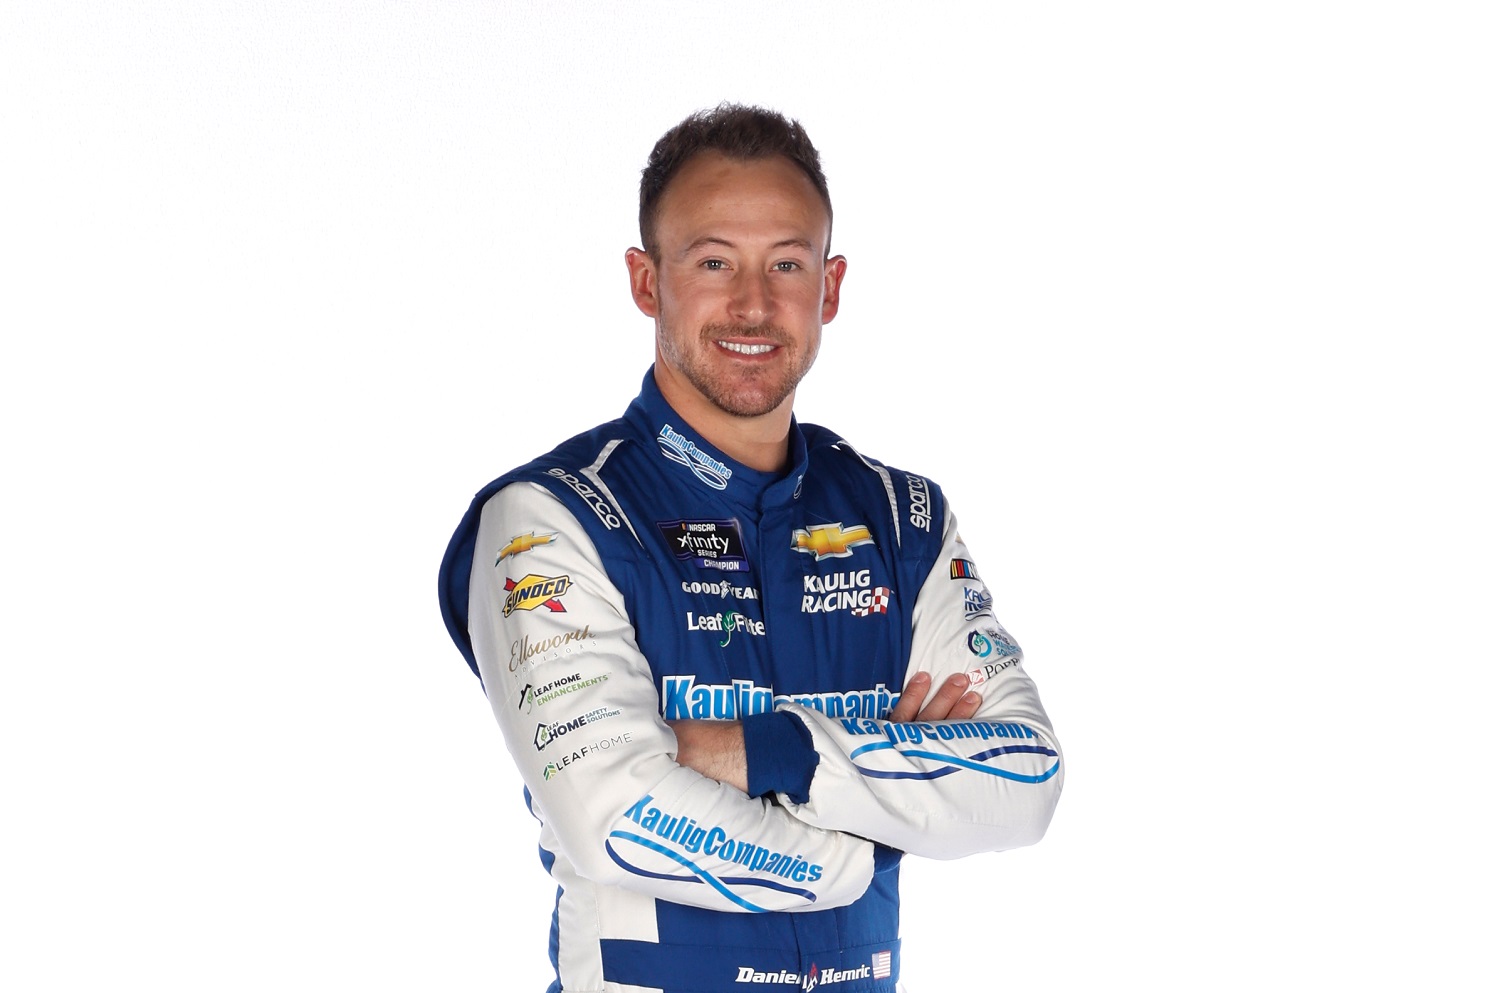 NASCAR driver Daniel Hemric poses for a photo during NASCAR Production Days at Clutch Studios on Jan. 18, 2022, in Concord, North Carolina.